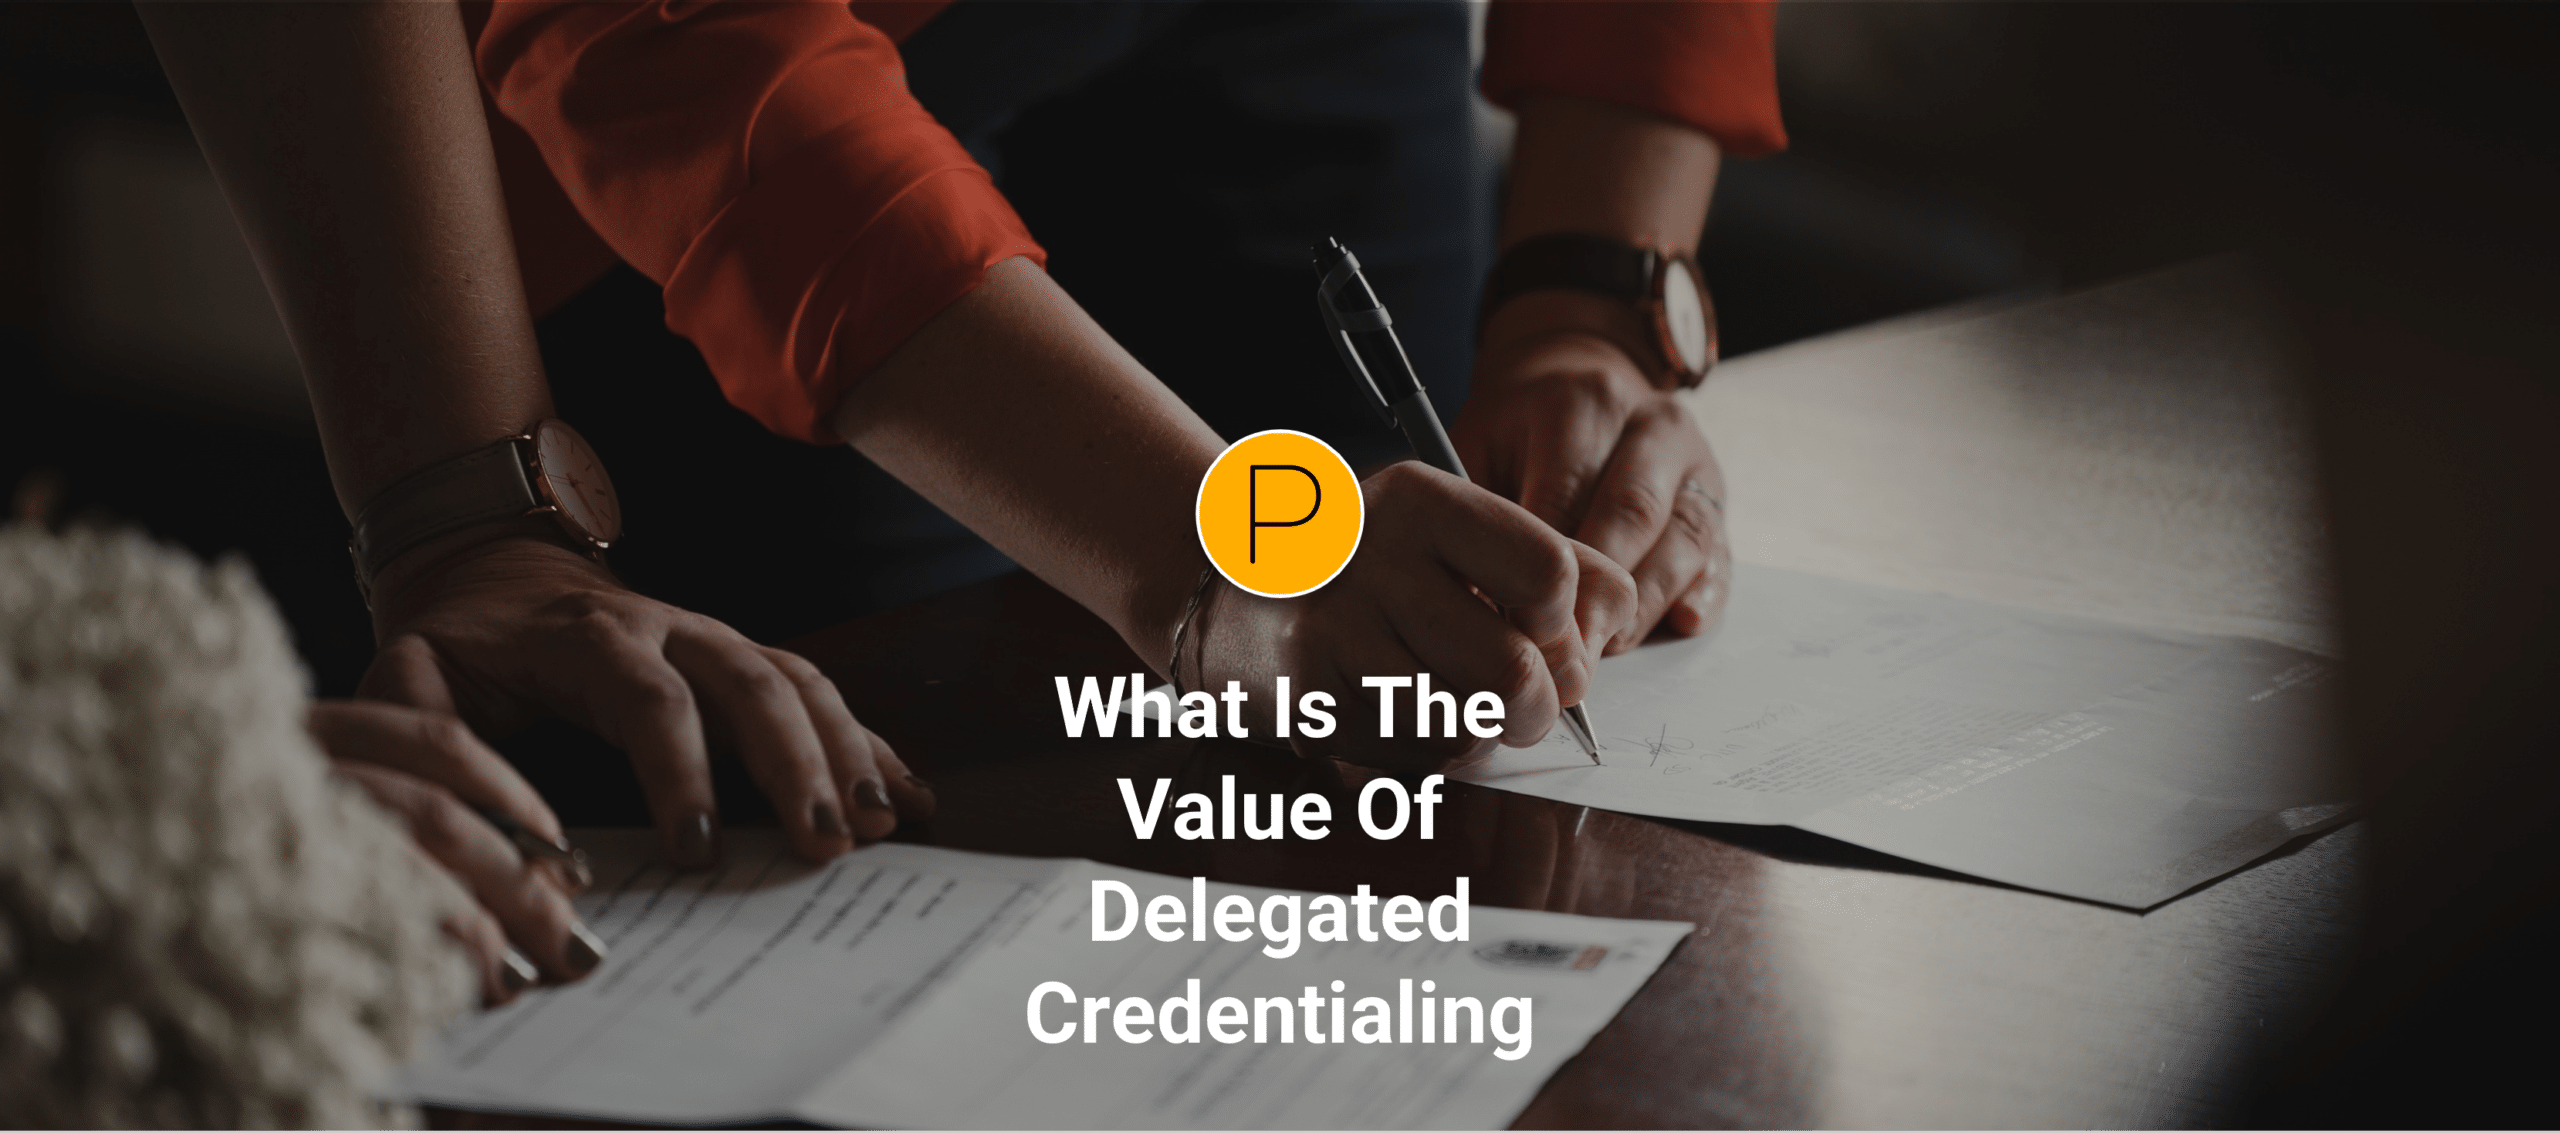 What Is The Value Of Delegated Credentialing